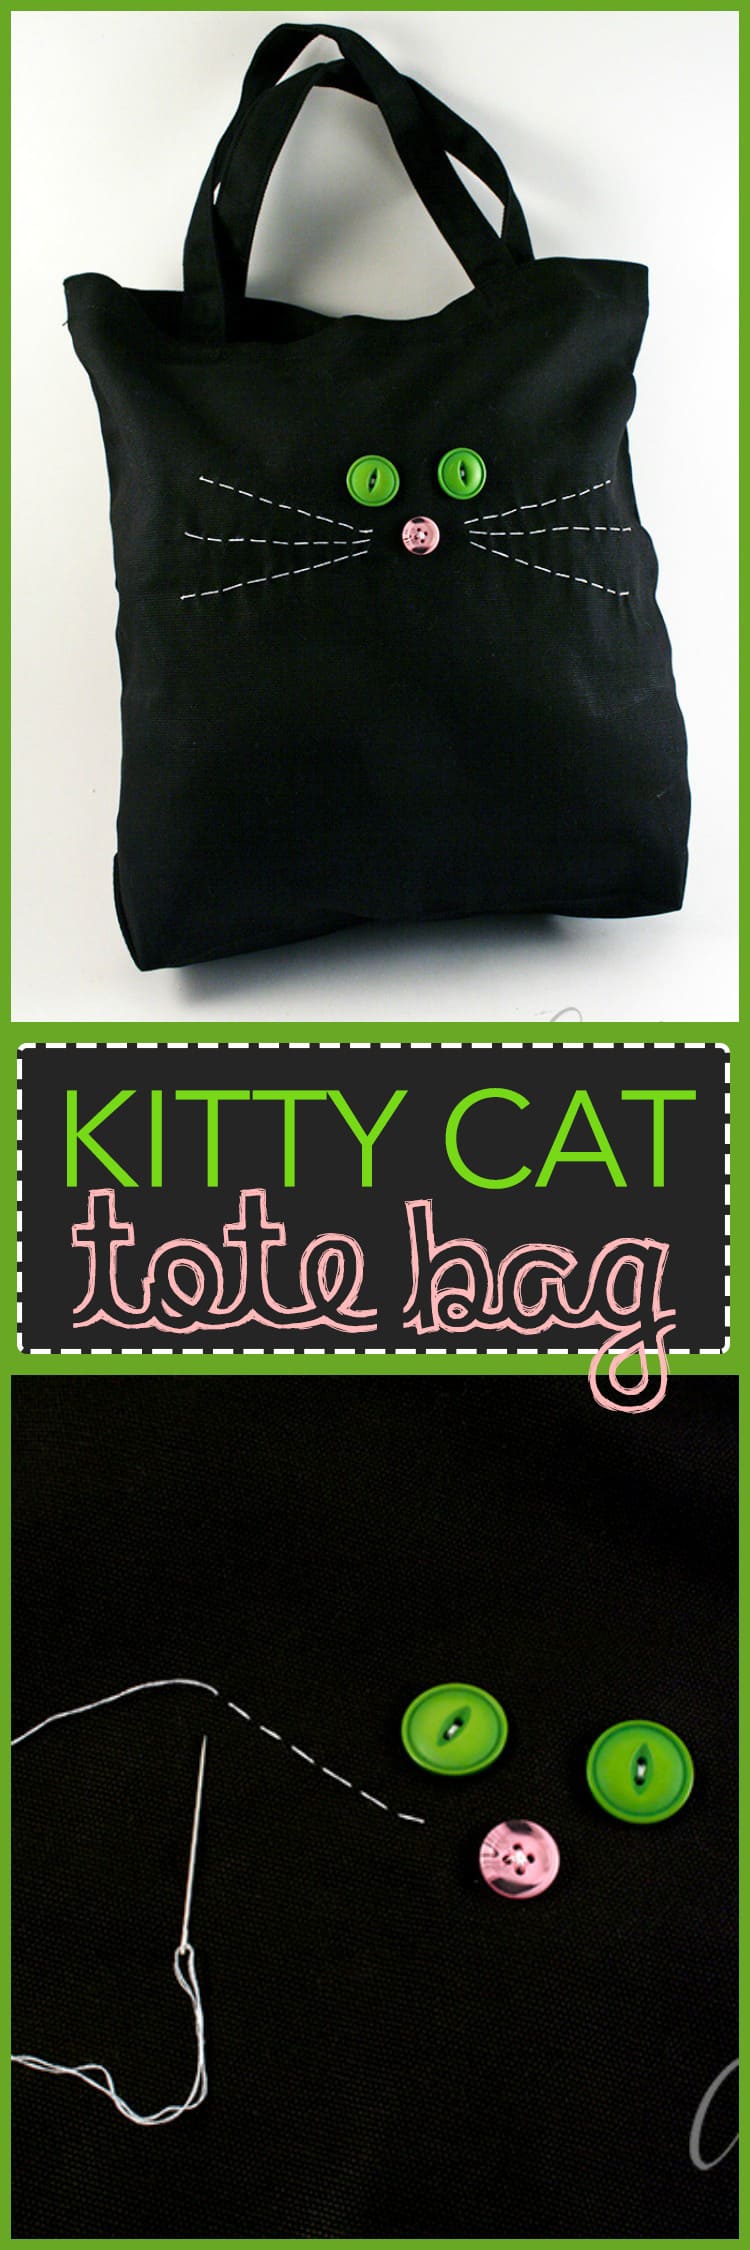 Kids will love learning to how hand stitch this sweet kitty cat tote bag, perfect for carrying around their dolls, toys or craft supplies!